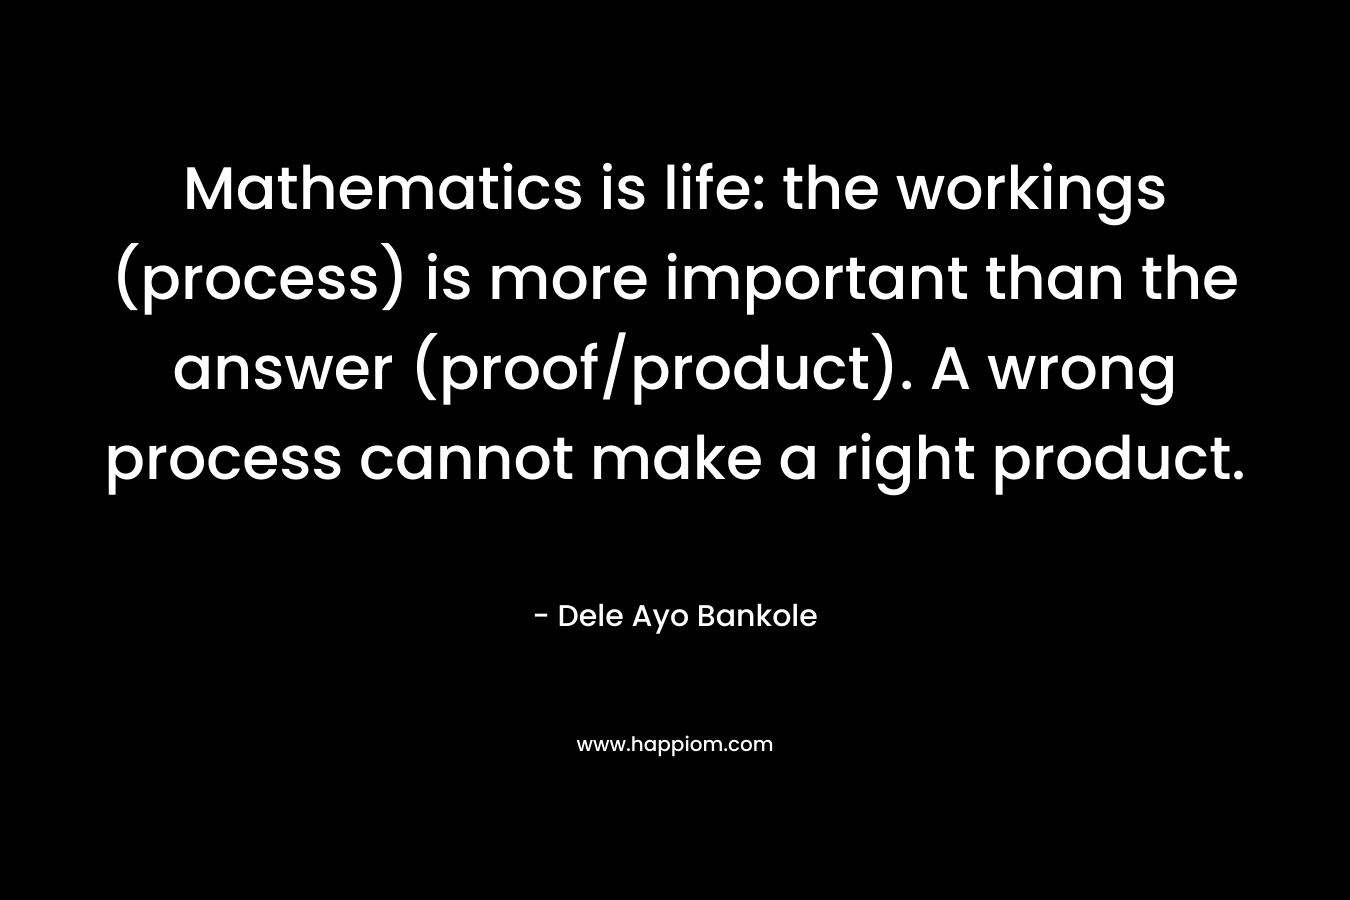 Mathematics is life: the workings (process) is more important than the answer (proof/product). A wrong process cannot make a right product.